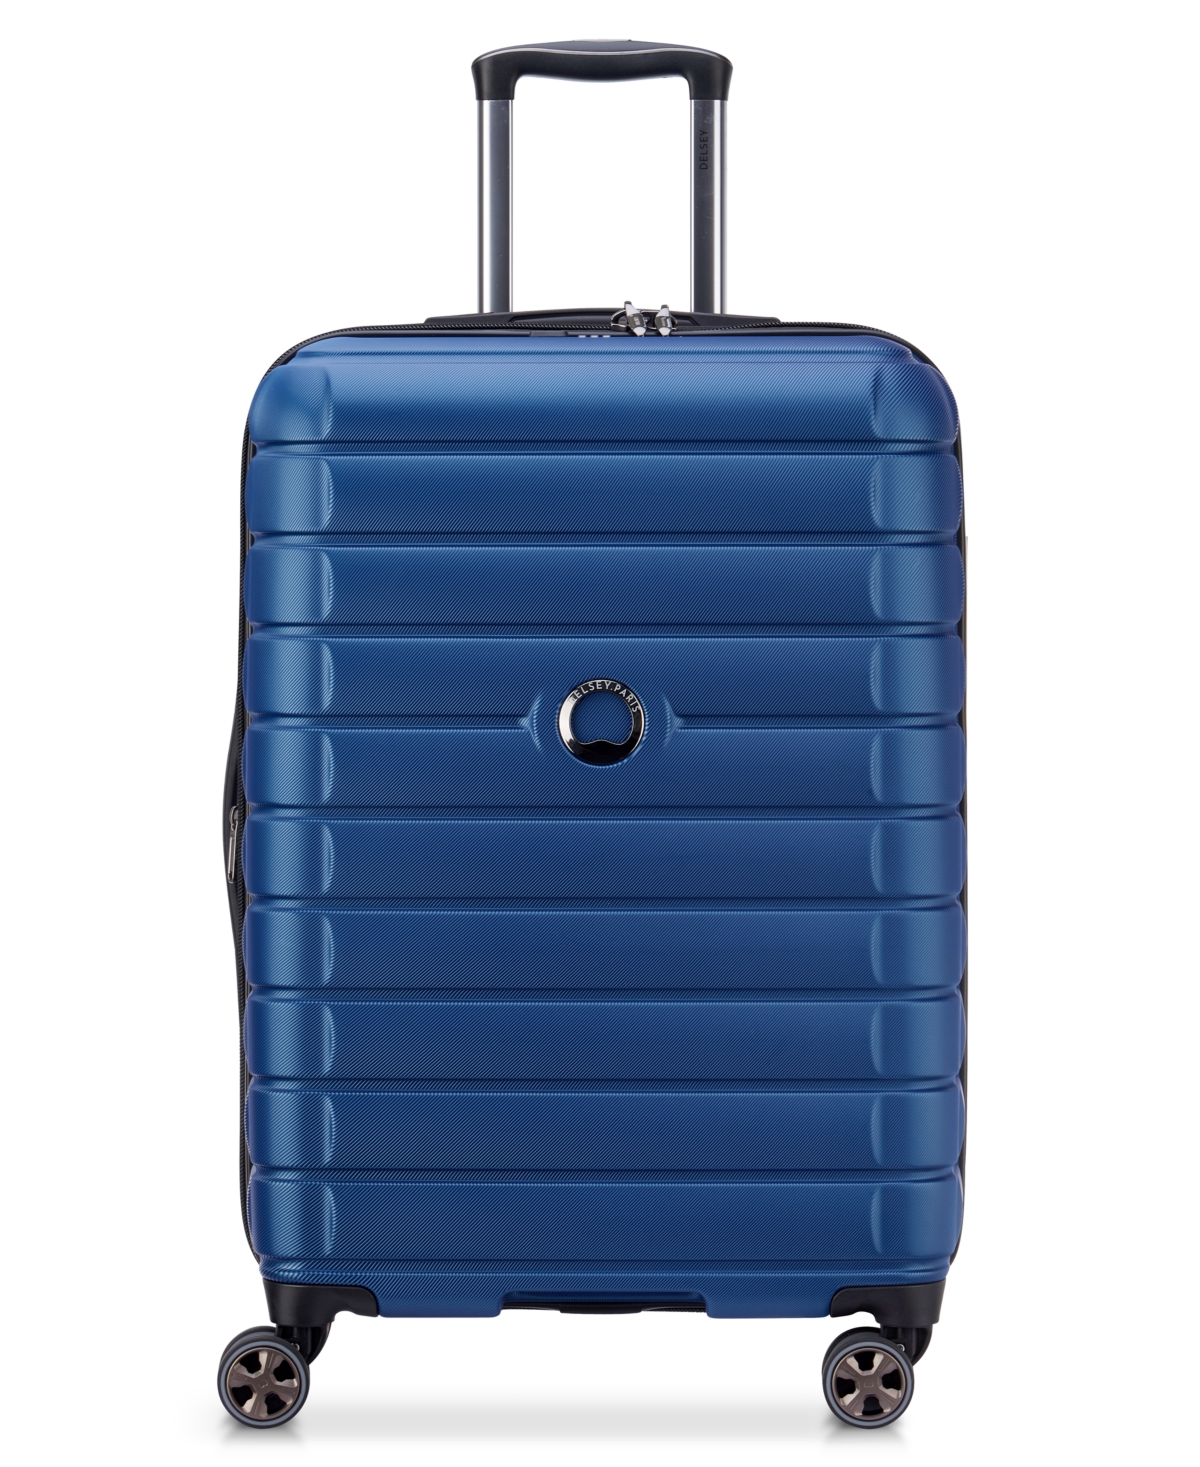 Shadow 5.0 Expandable 24" Check-in Spinner Luggage - Cobalt Blue